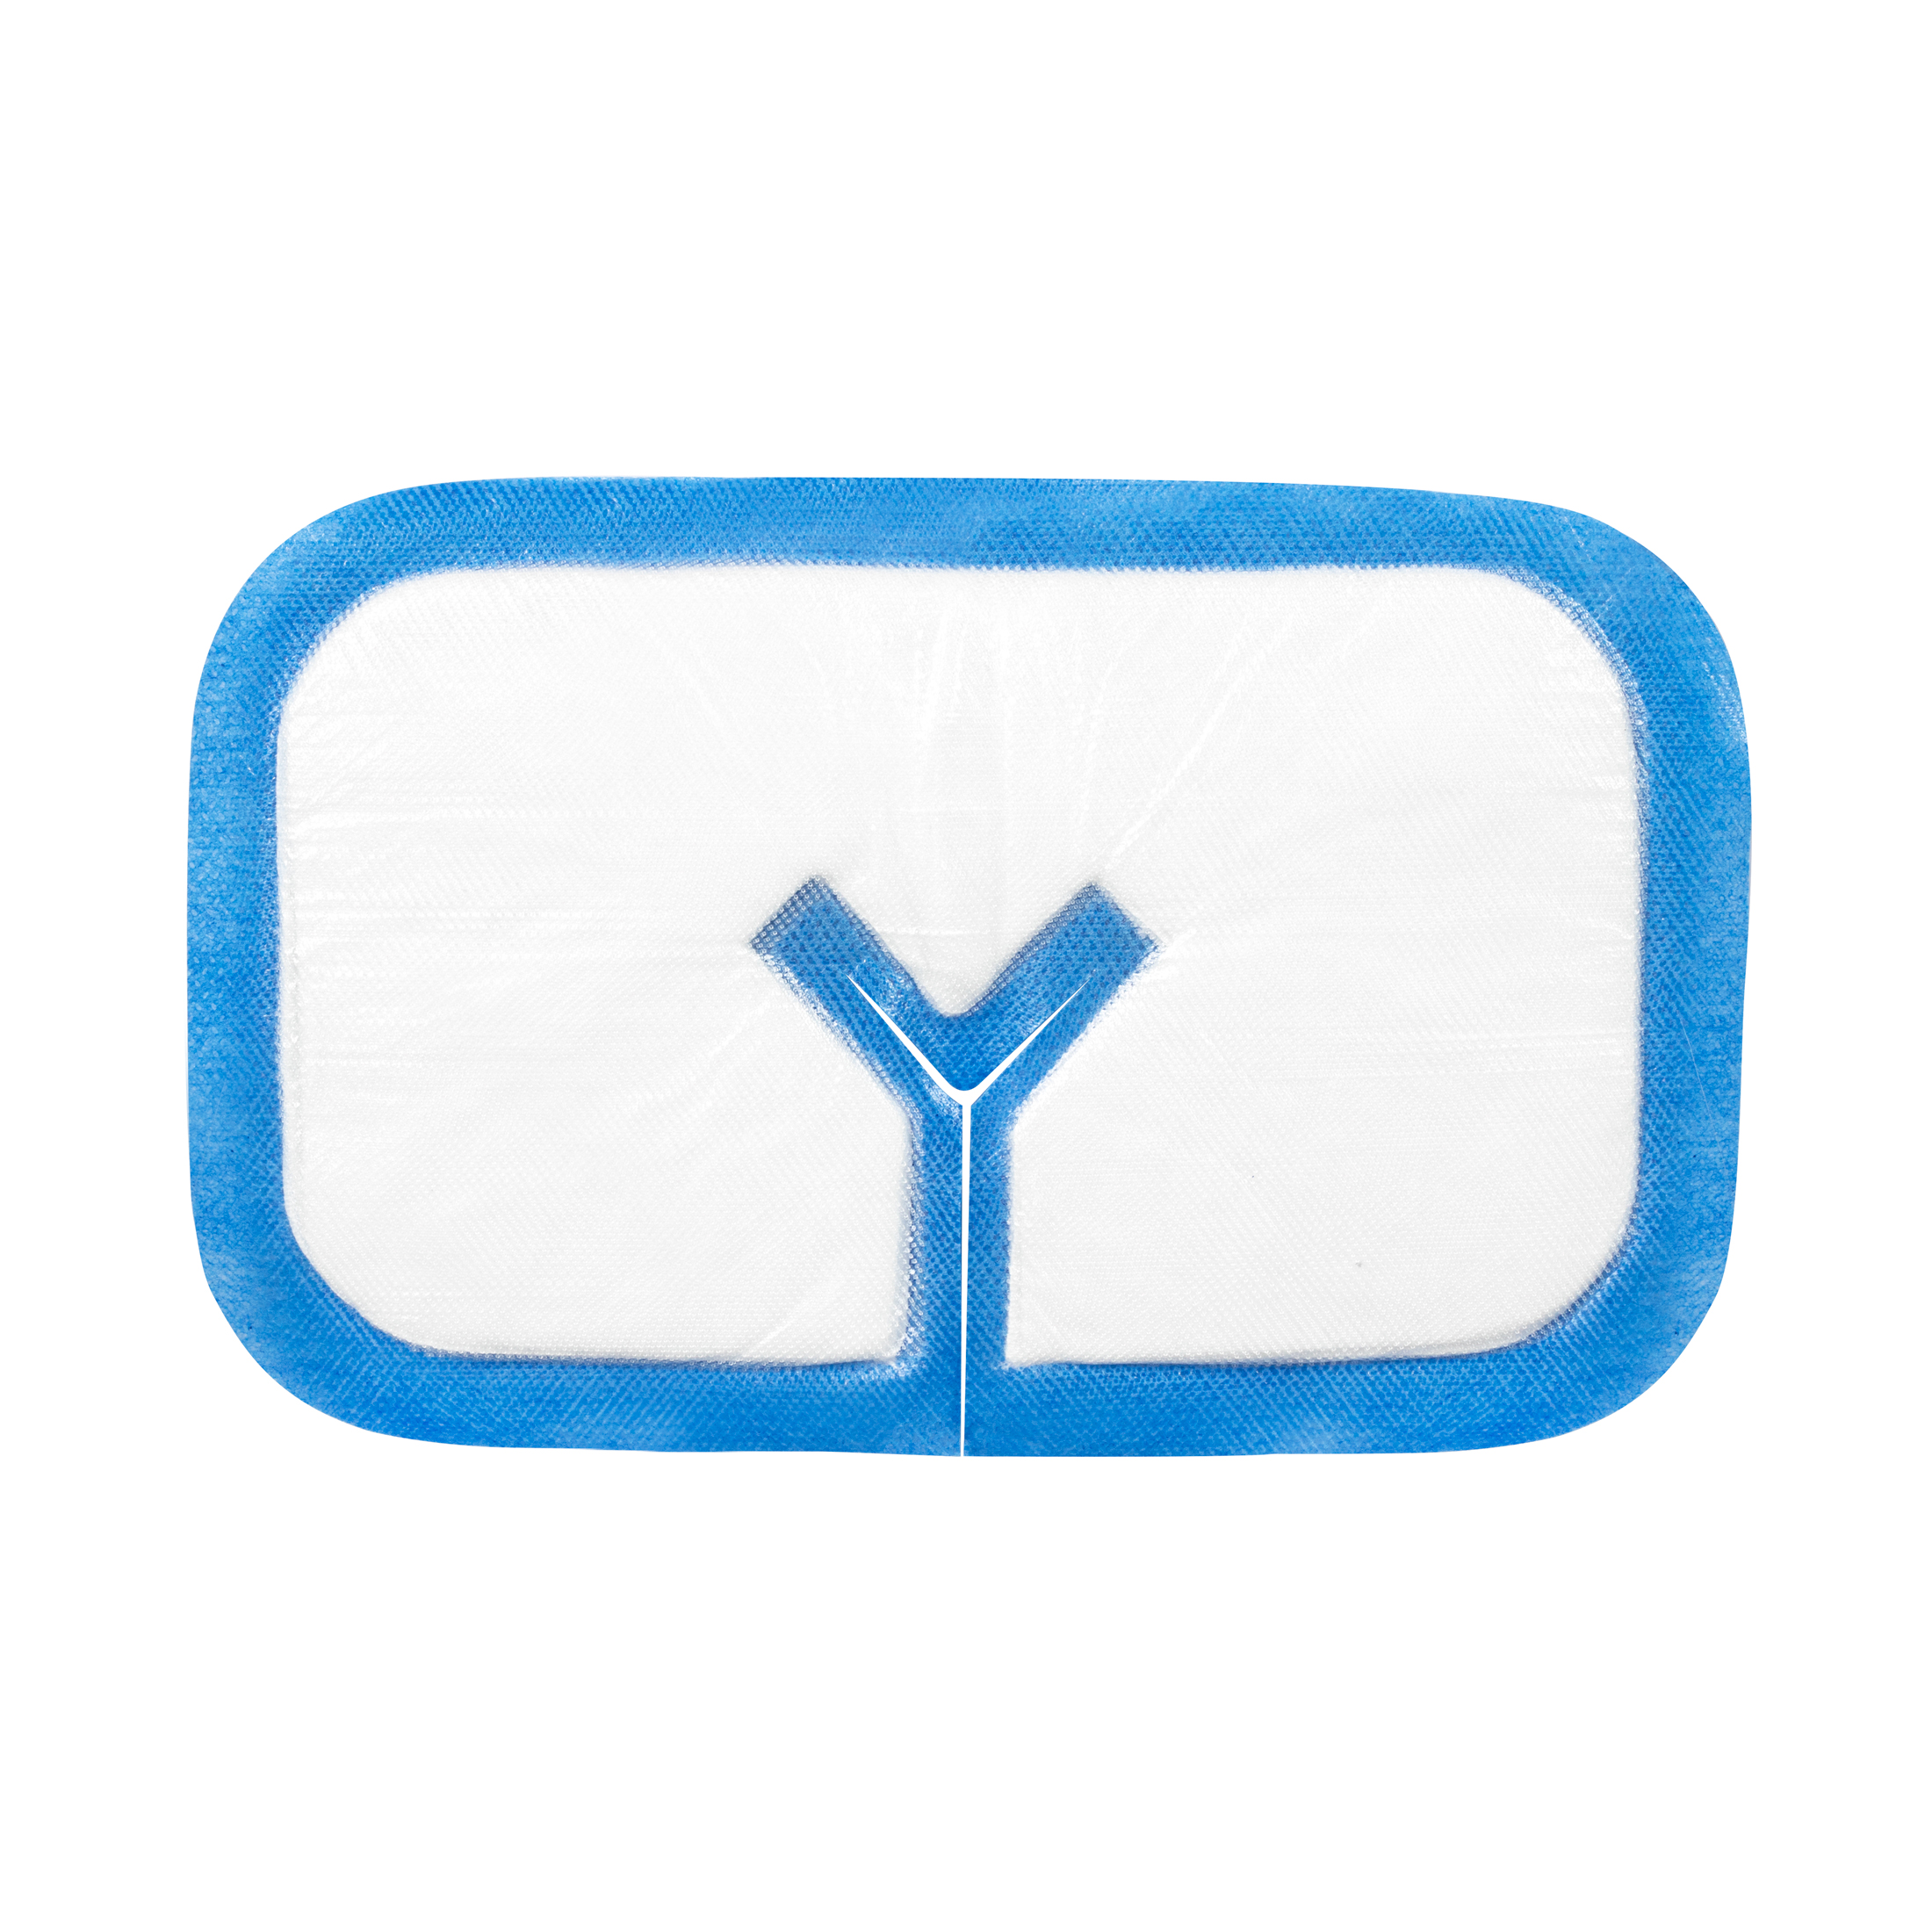 Tracheostomy Drain Sponges Products, Supplies and Equipment